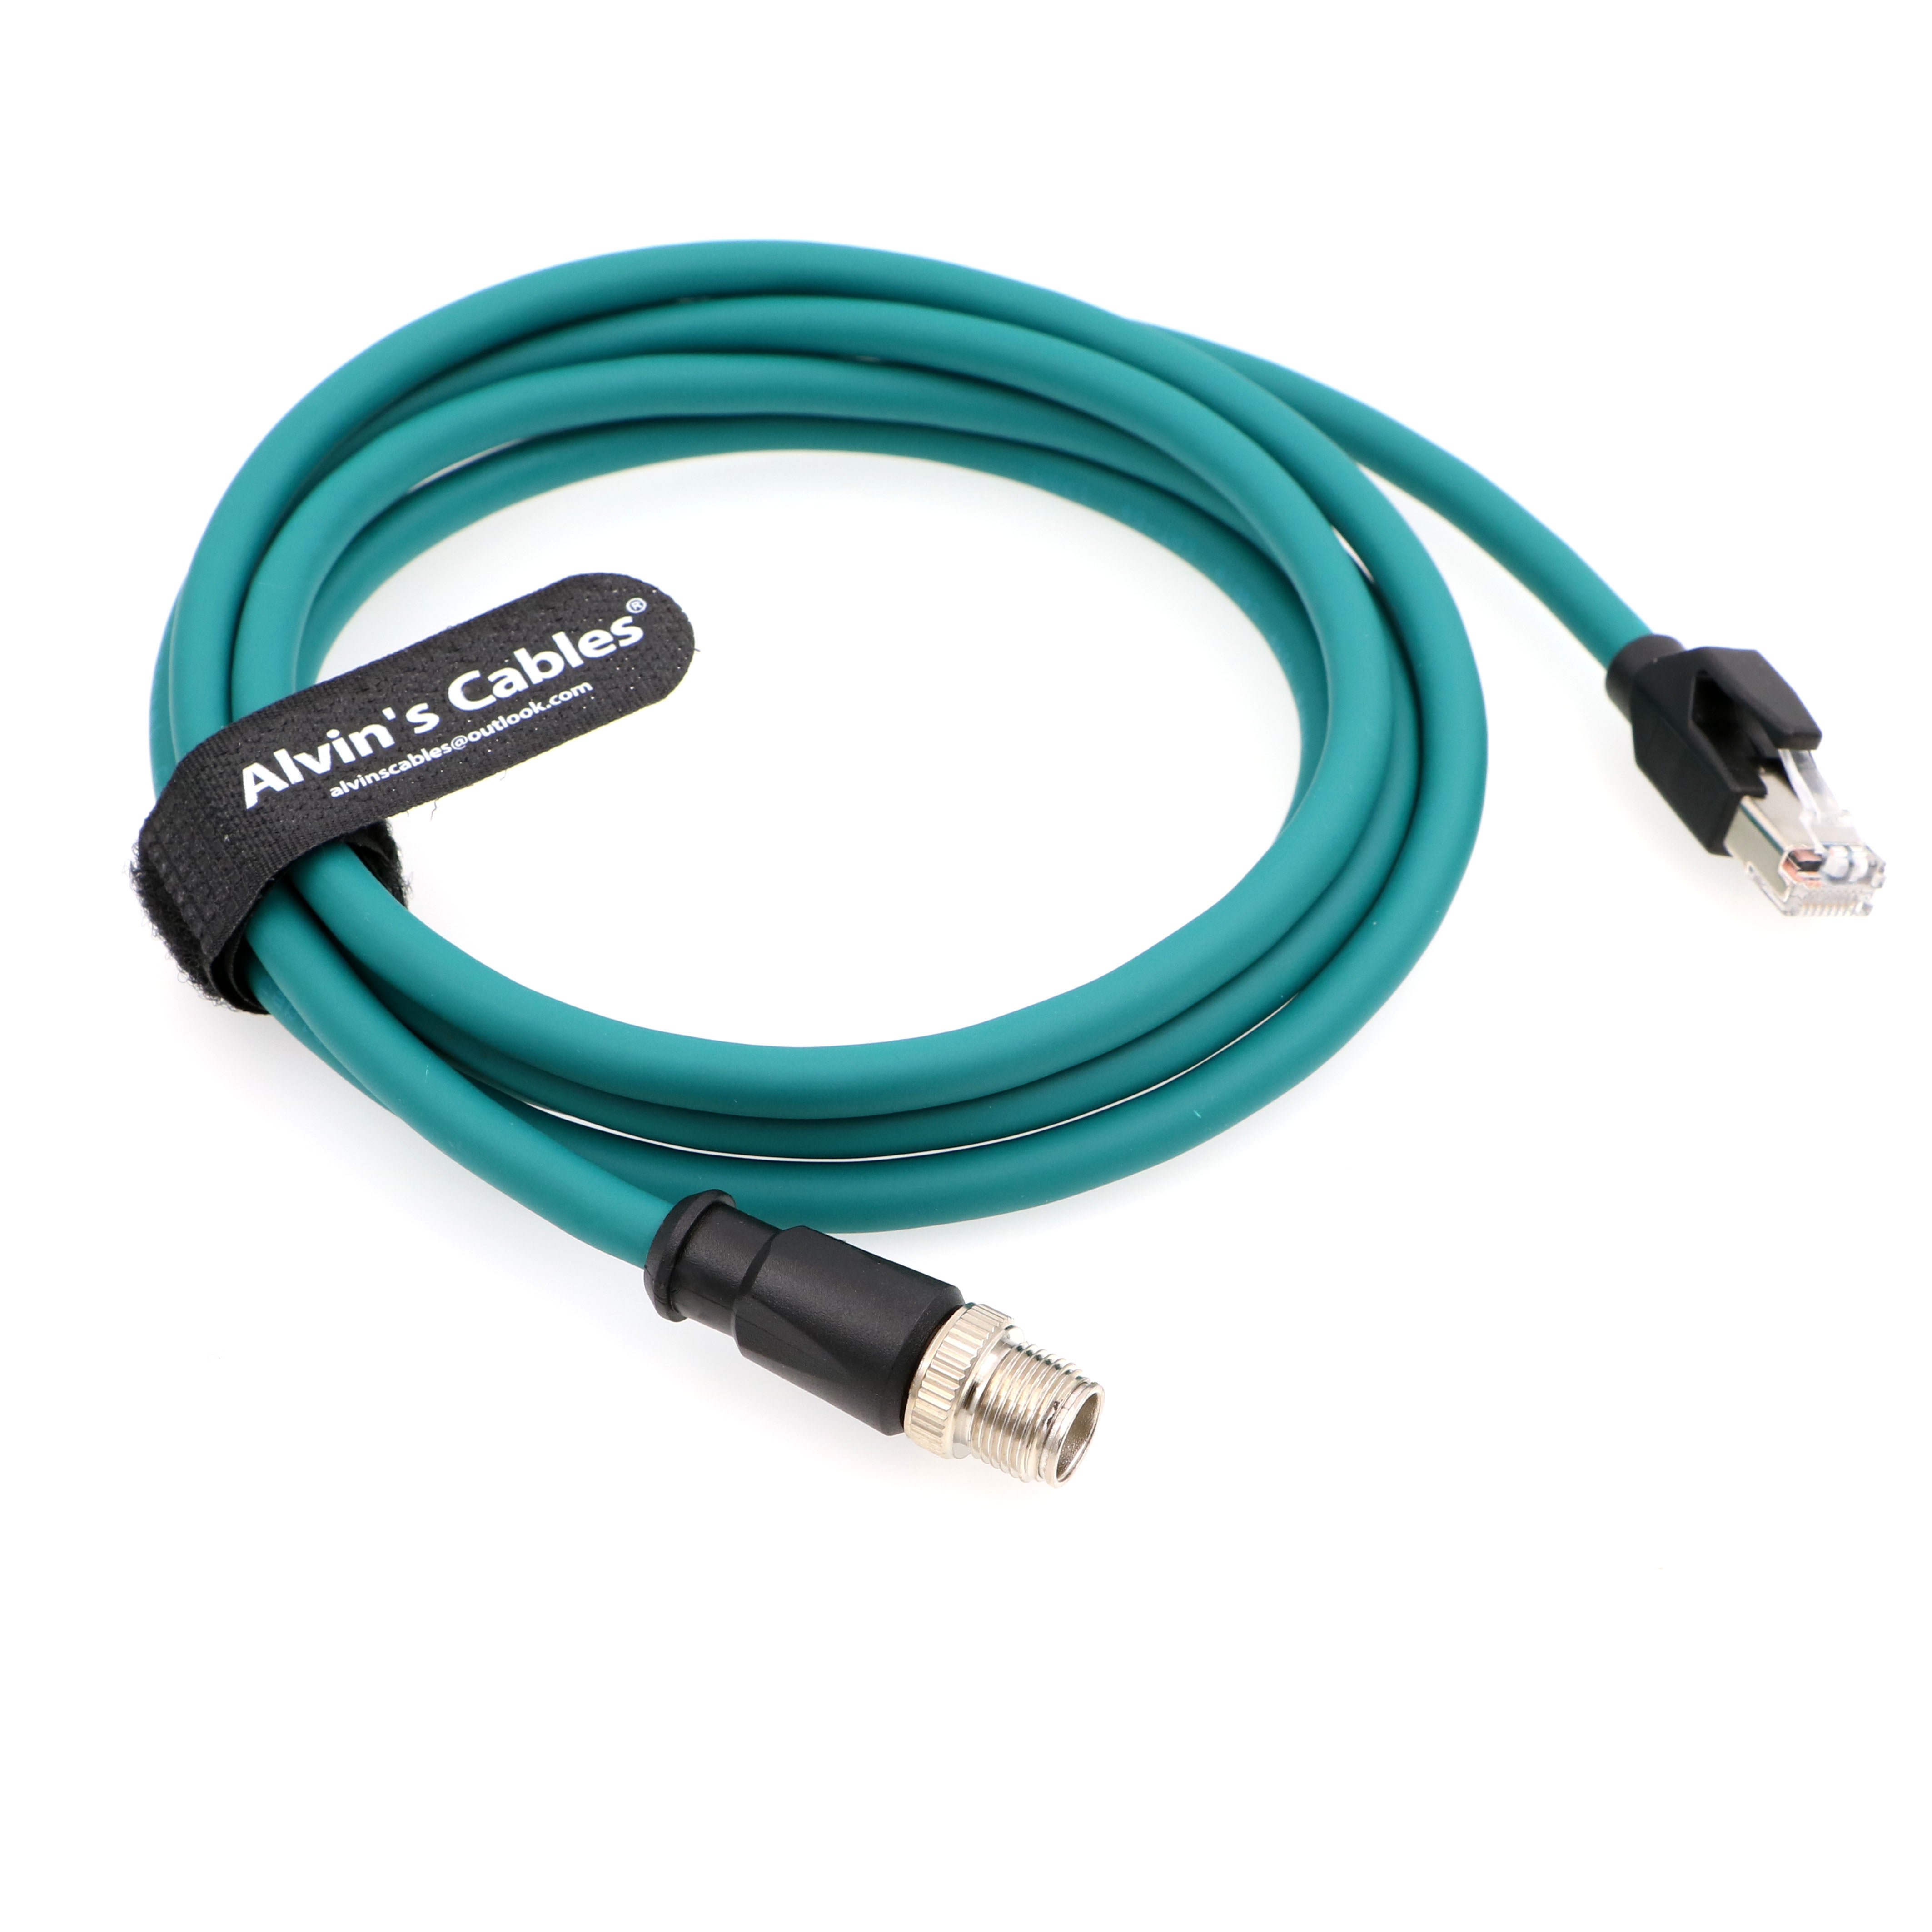 Alvin’s Cables M12 8 Pole X-Code Male to RJ45 Cat6a Ethernet Shielded Cable for Cognex Industrial Camera